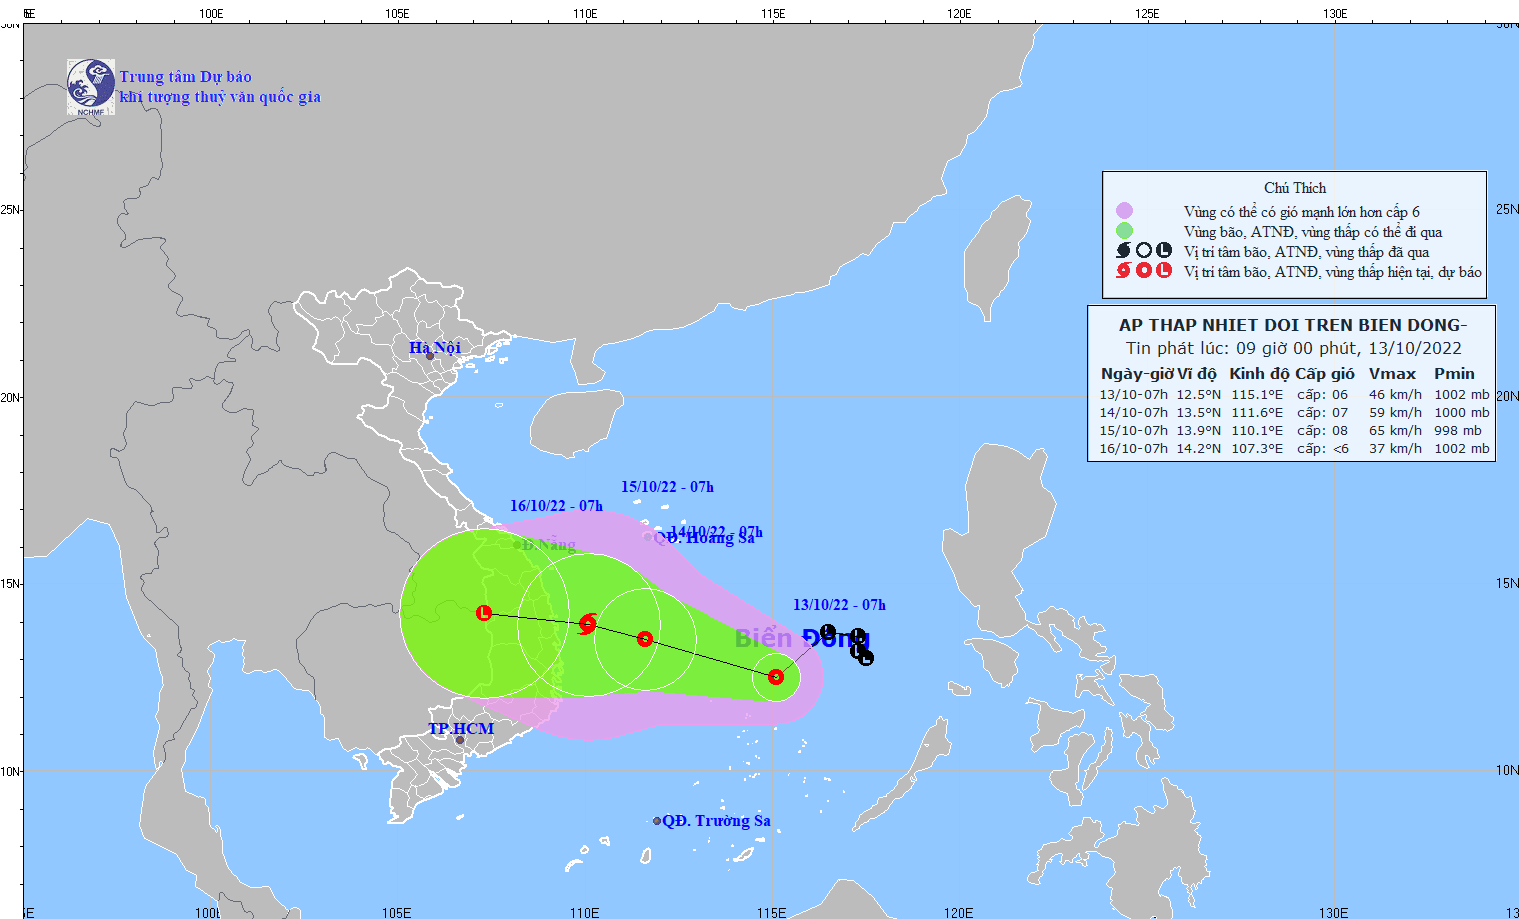 Low- pressure zone in middle of East Sea intensifies into tropical depression  ảnh 1